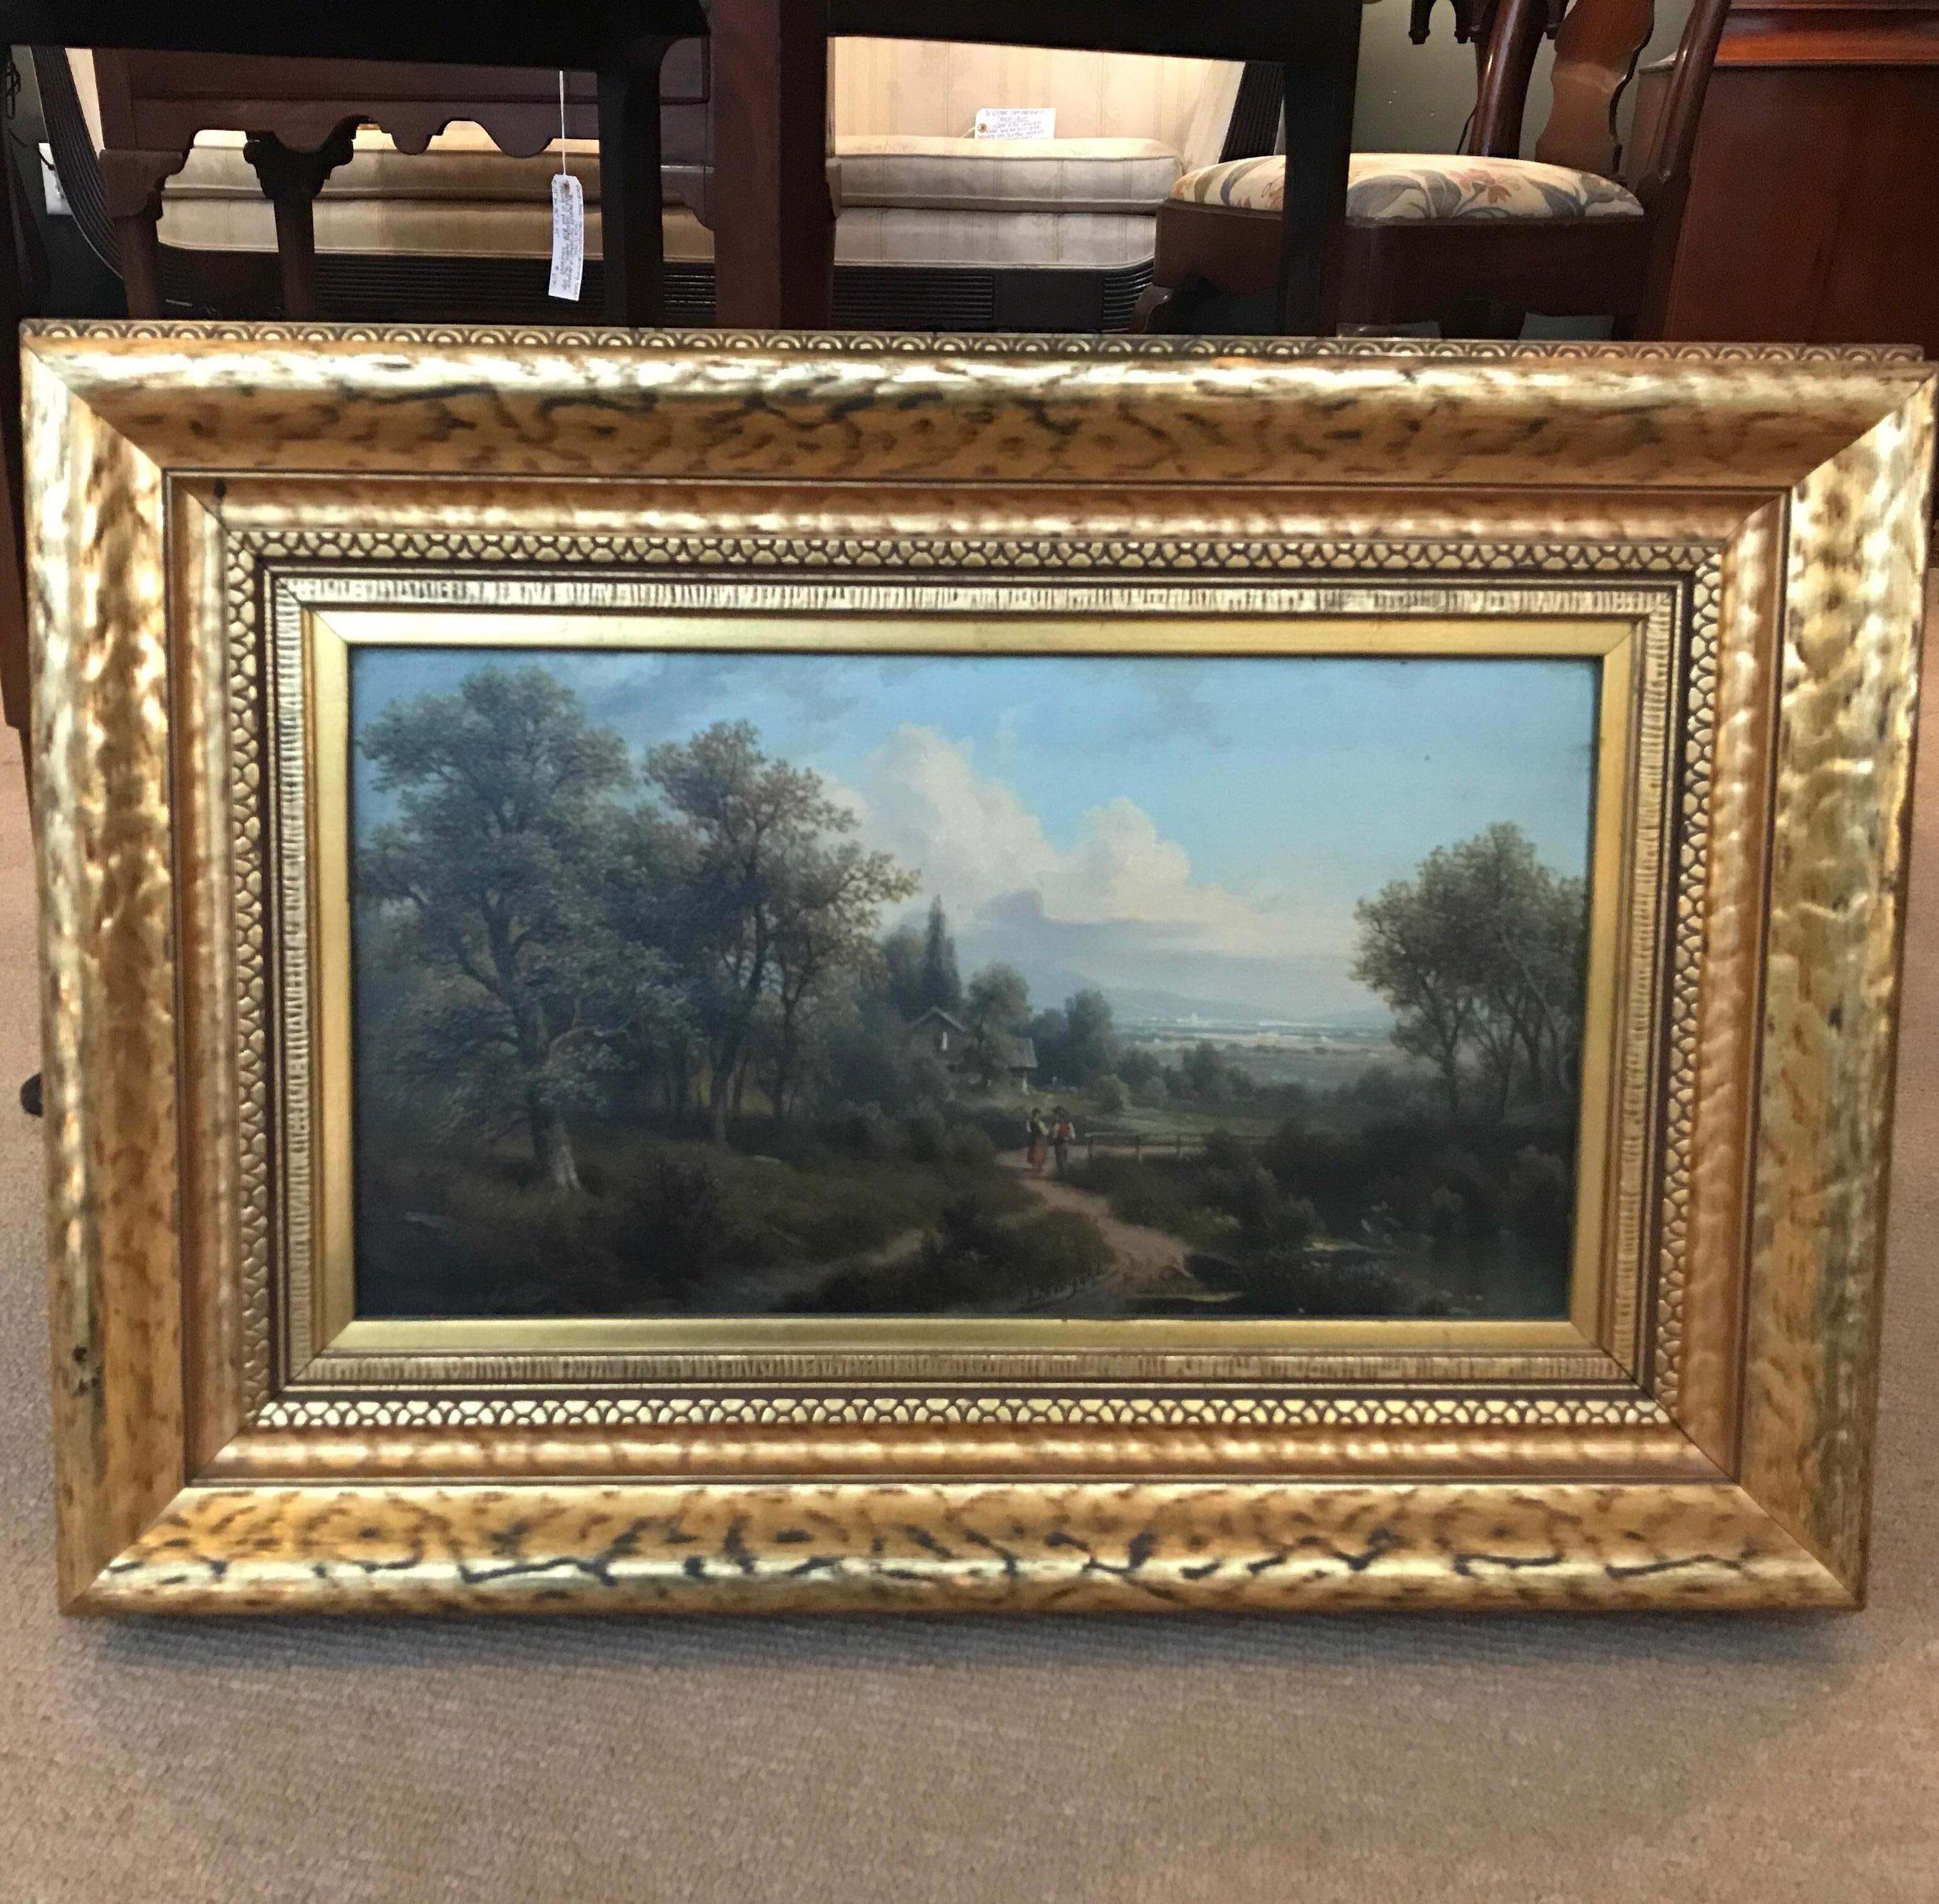 Stunning 19th century bucolic scene in original giltwood frame. The original oil painting is Artist-signed on the lower right ‘J. Baughman’ or some version of that and is mid-19th century circa 1840-1860 of English origin. The left of the painting